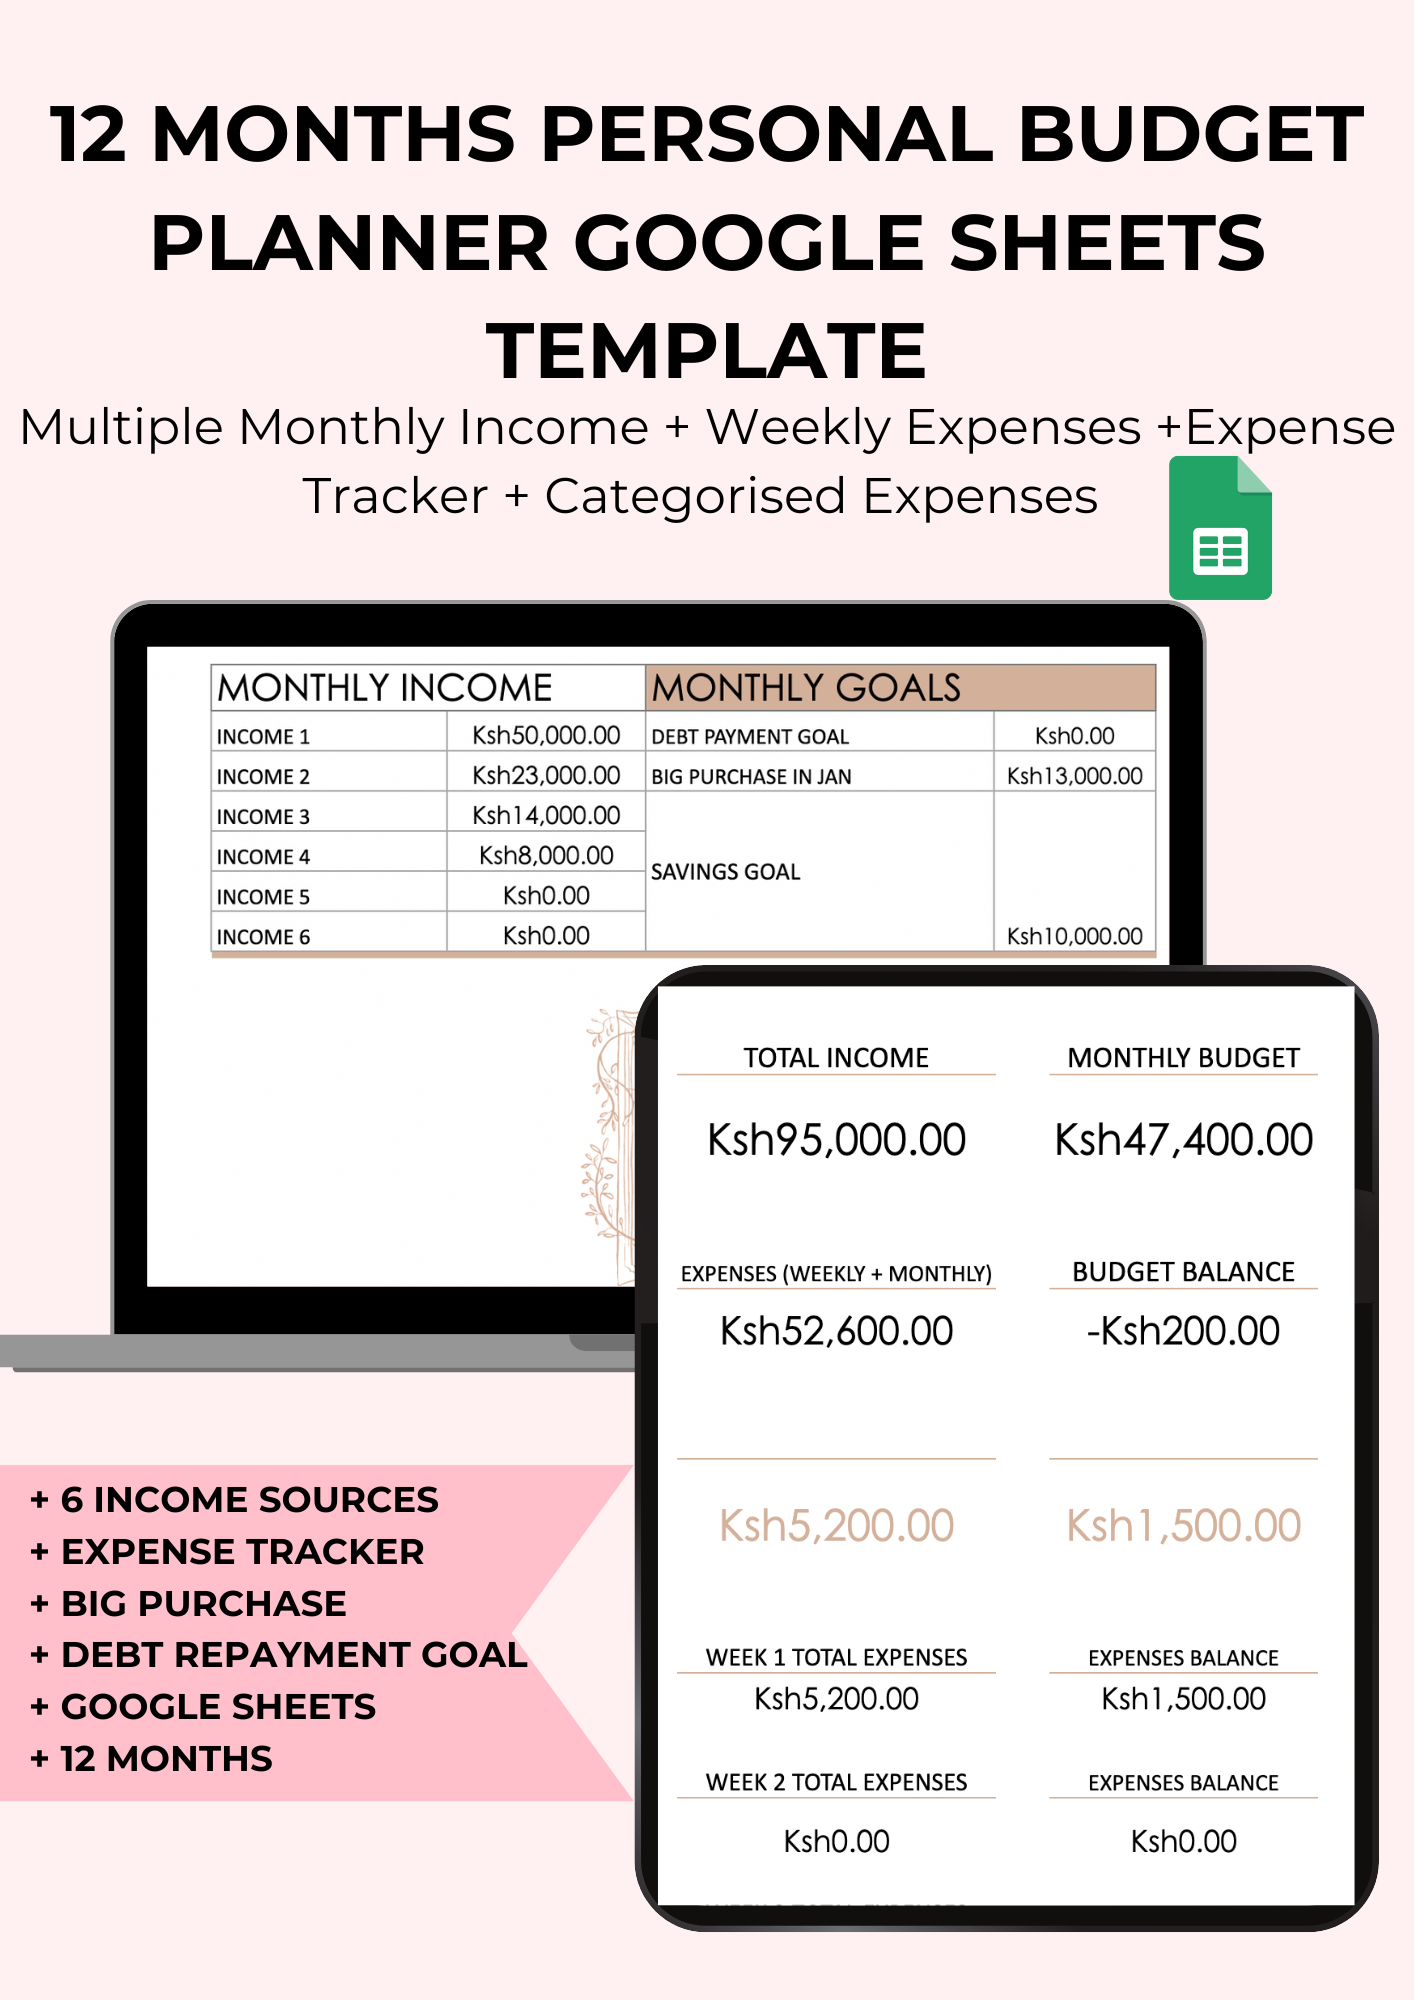 ALL IN ONE EXCLUSIVE BUNDLE (3 WORKBOOKS & 2 GOOGLE SHEETS TEMPLATES)